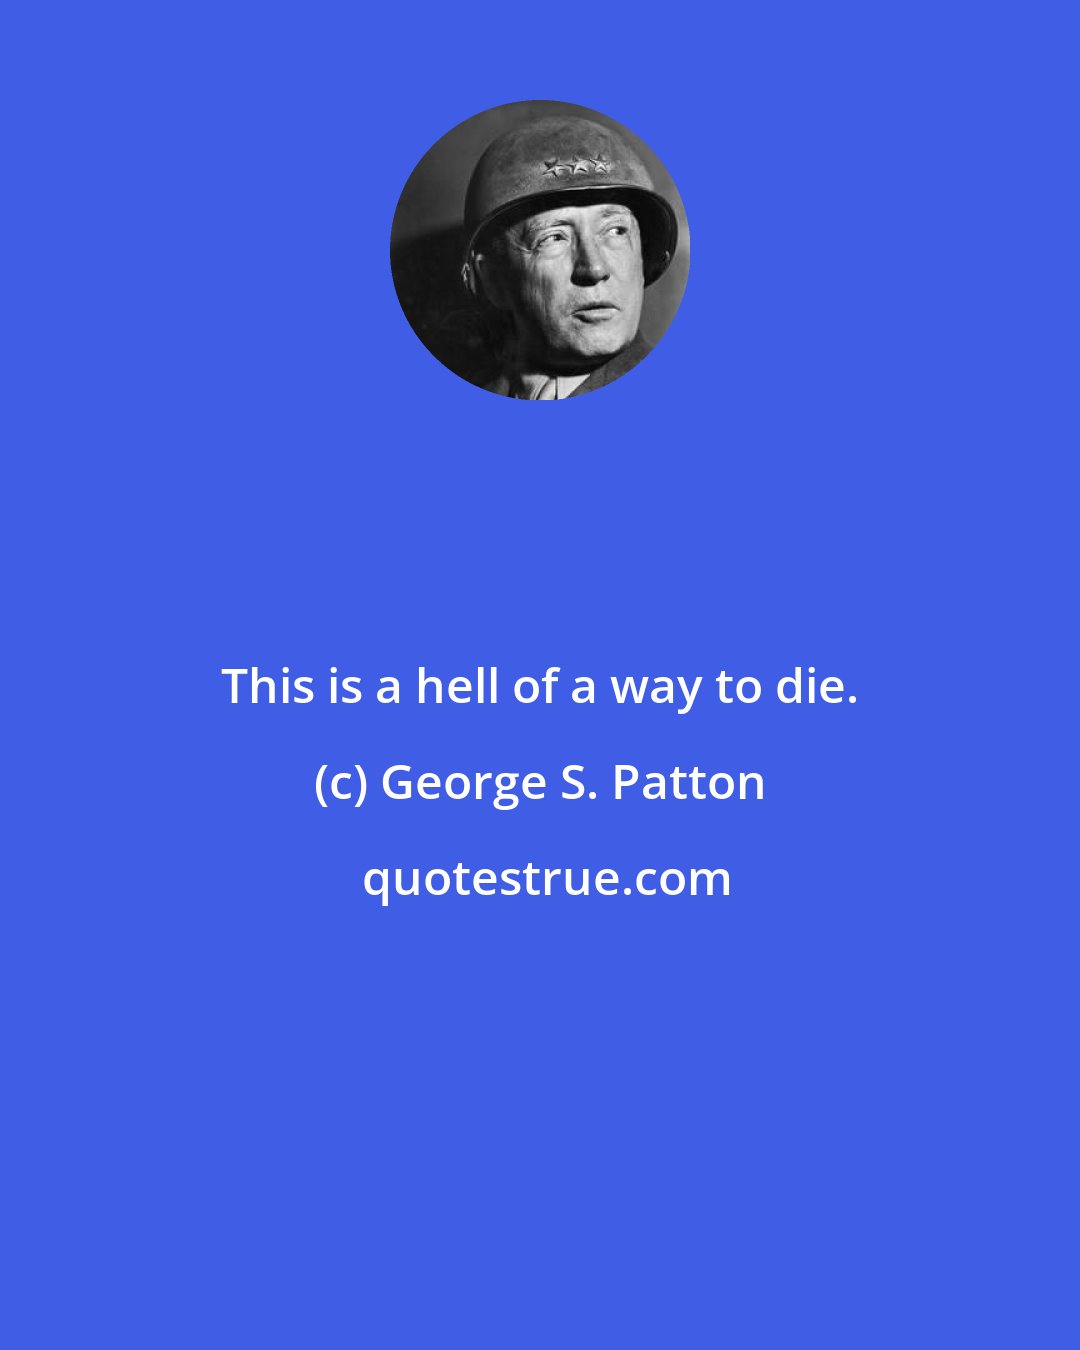 George S. Patton: This is a hell of a way to die.